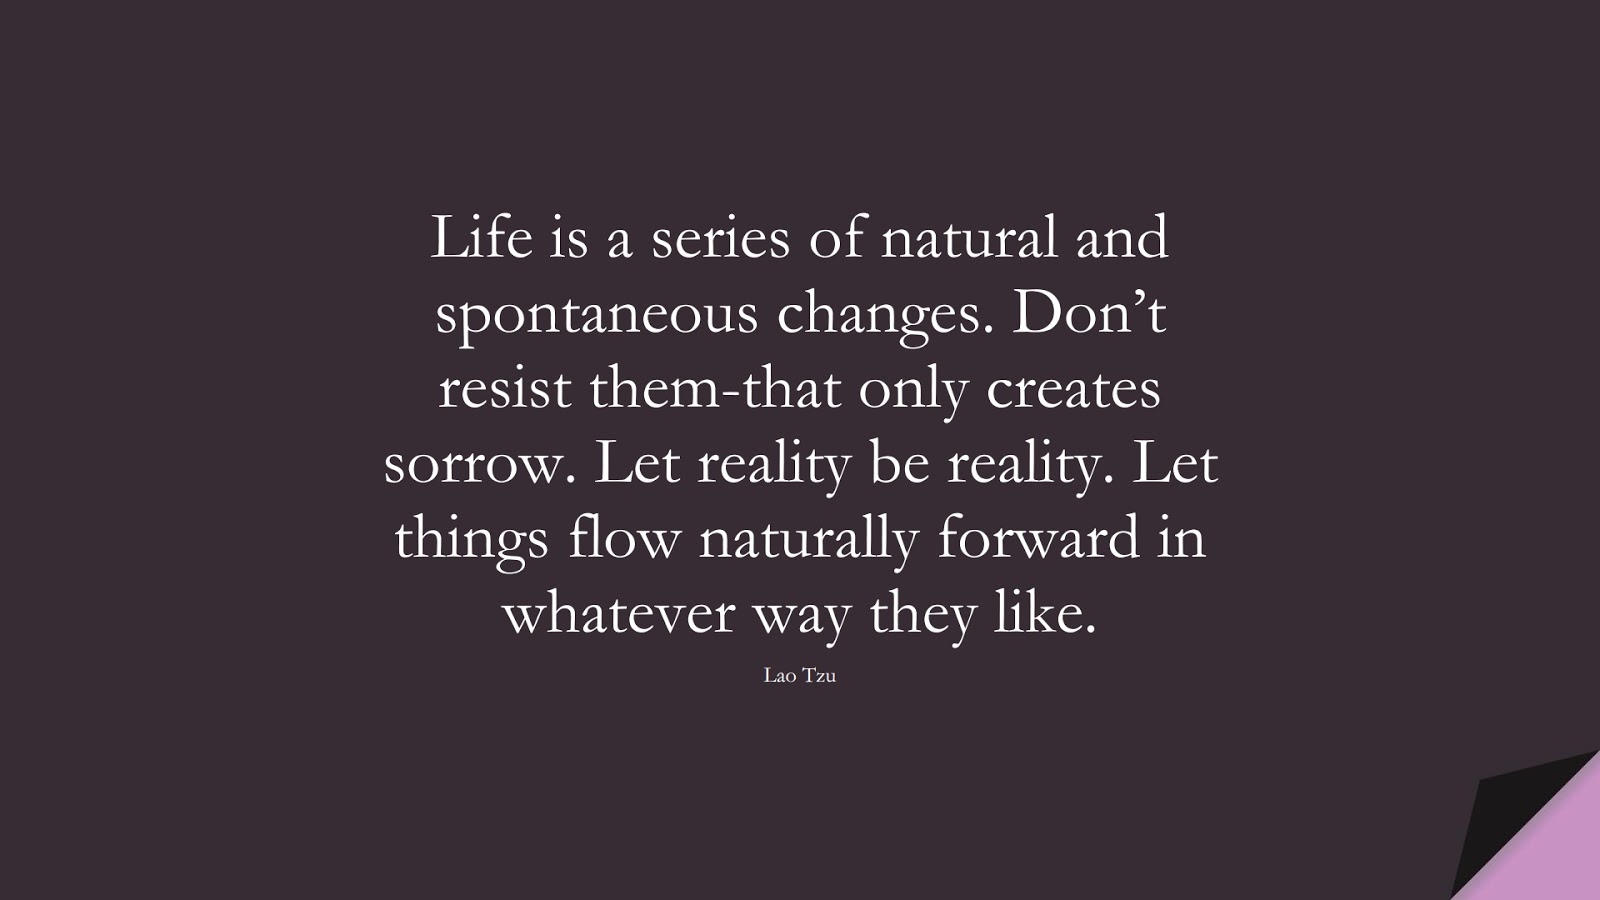 Life is a series of natural and spontaneous changes. Don’t resist them-that only creates sorrow. Let reality be reality. Let things flow naturally forward in whatever way they like. (Lao Tzu);  #HappinessQuotes